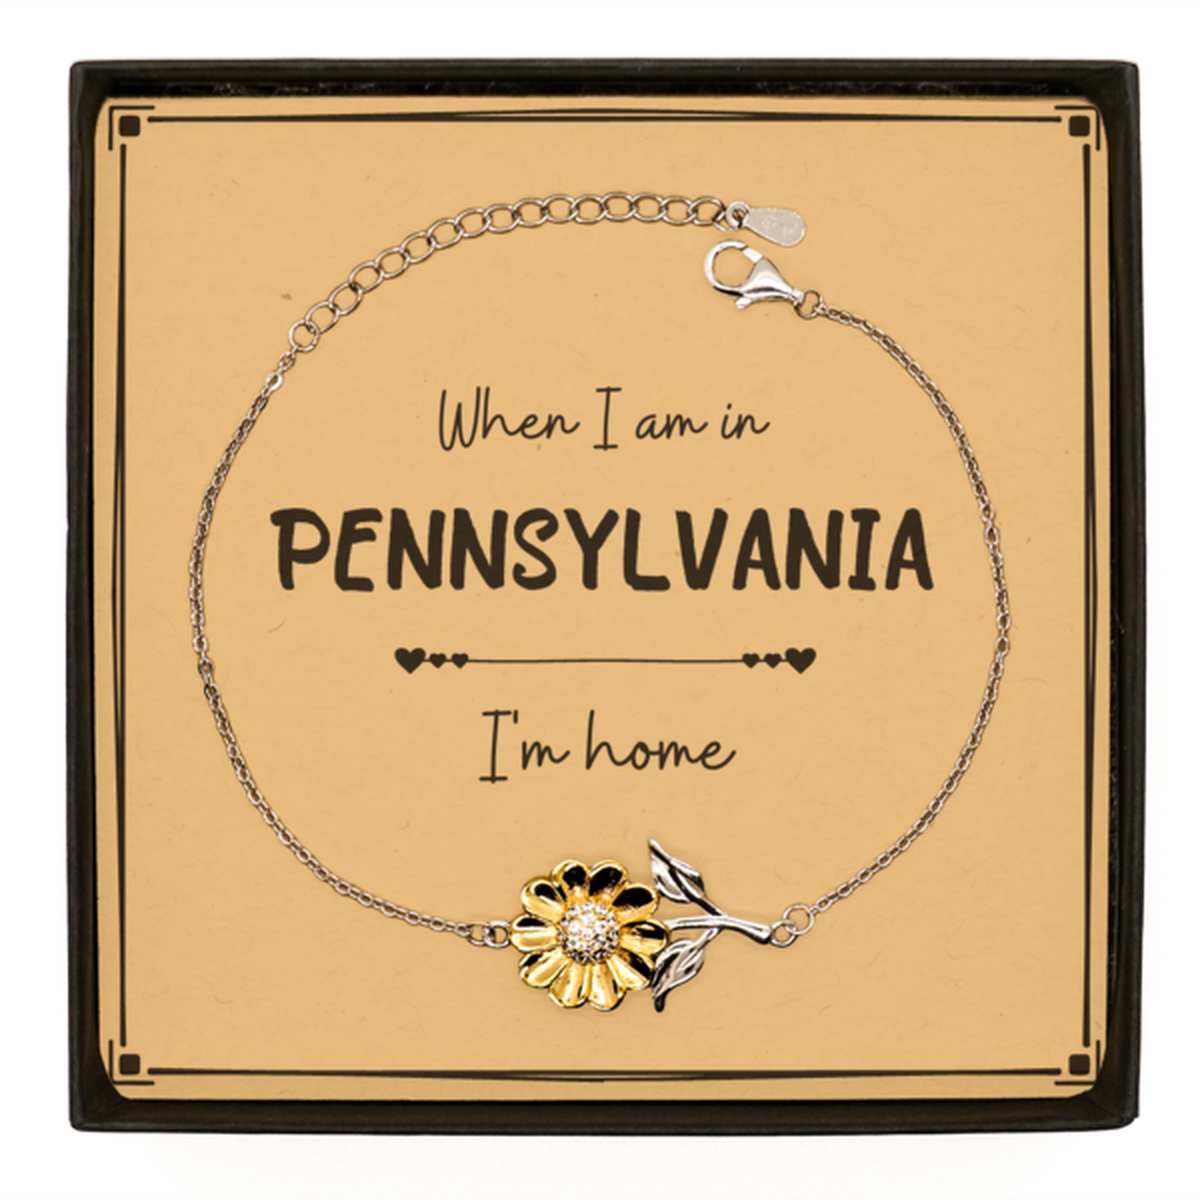 When I am in Pennsylvania I'm home Sunflower Bracelet, Message Card Gifts For Pennsylvania, State Pennsylvania Birthday Gifts for Friends Coworker